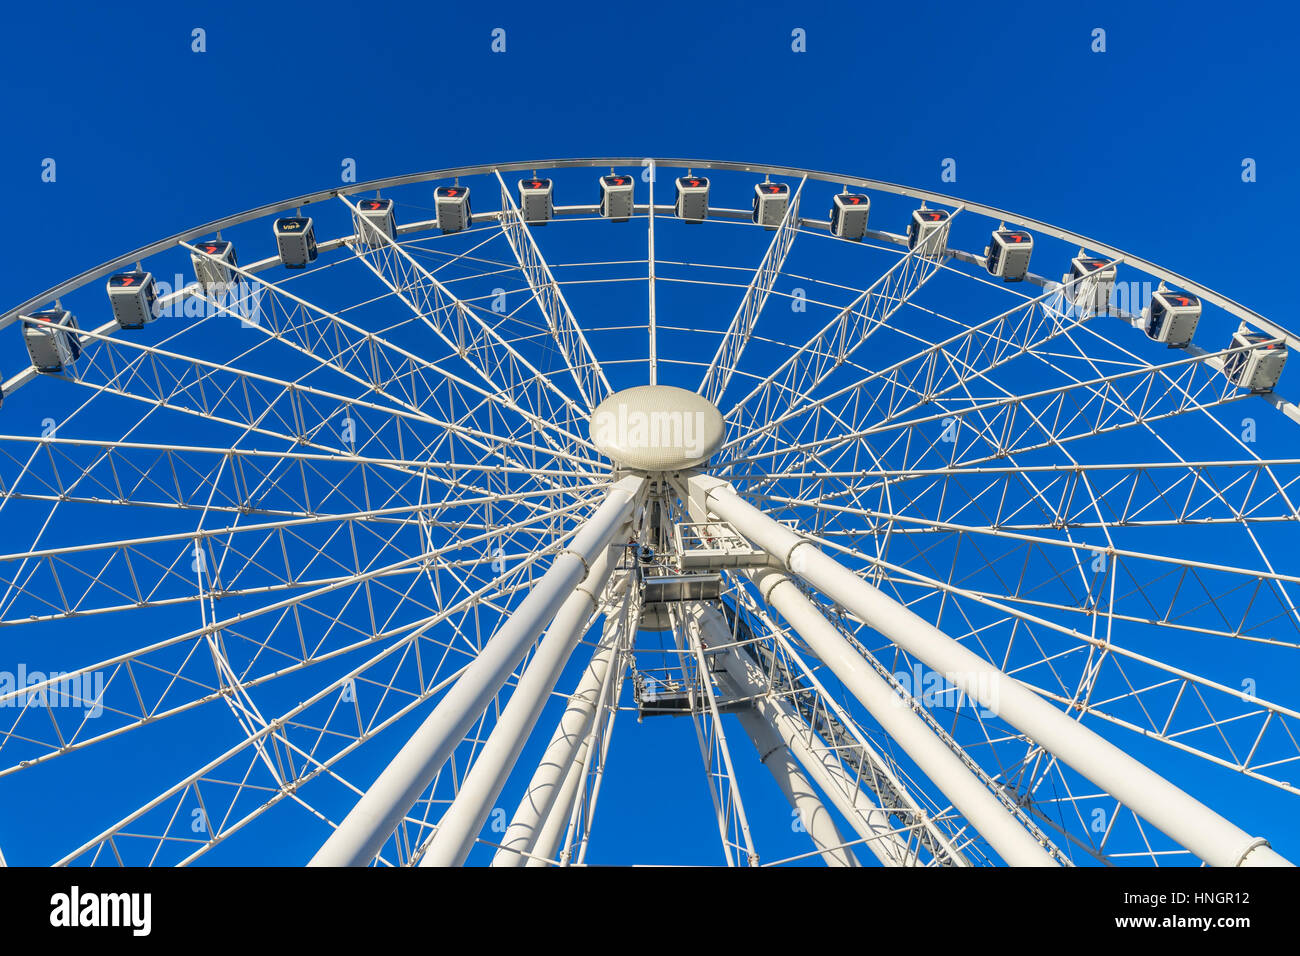 Brisbane, Australia - September 24, 2016: View of the Wheel of Brisbane in daytime. It is located at the northern entrance to South Bank Parklands in  Stock Photo